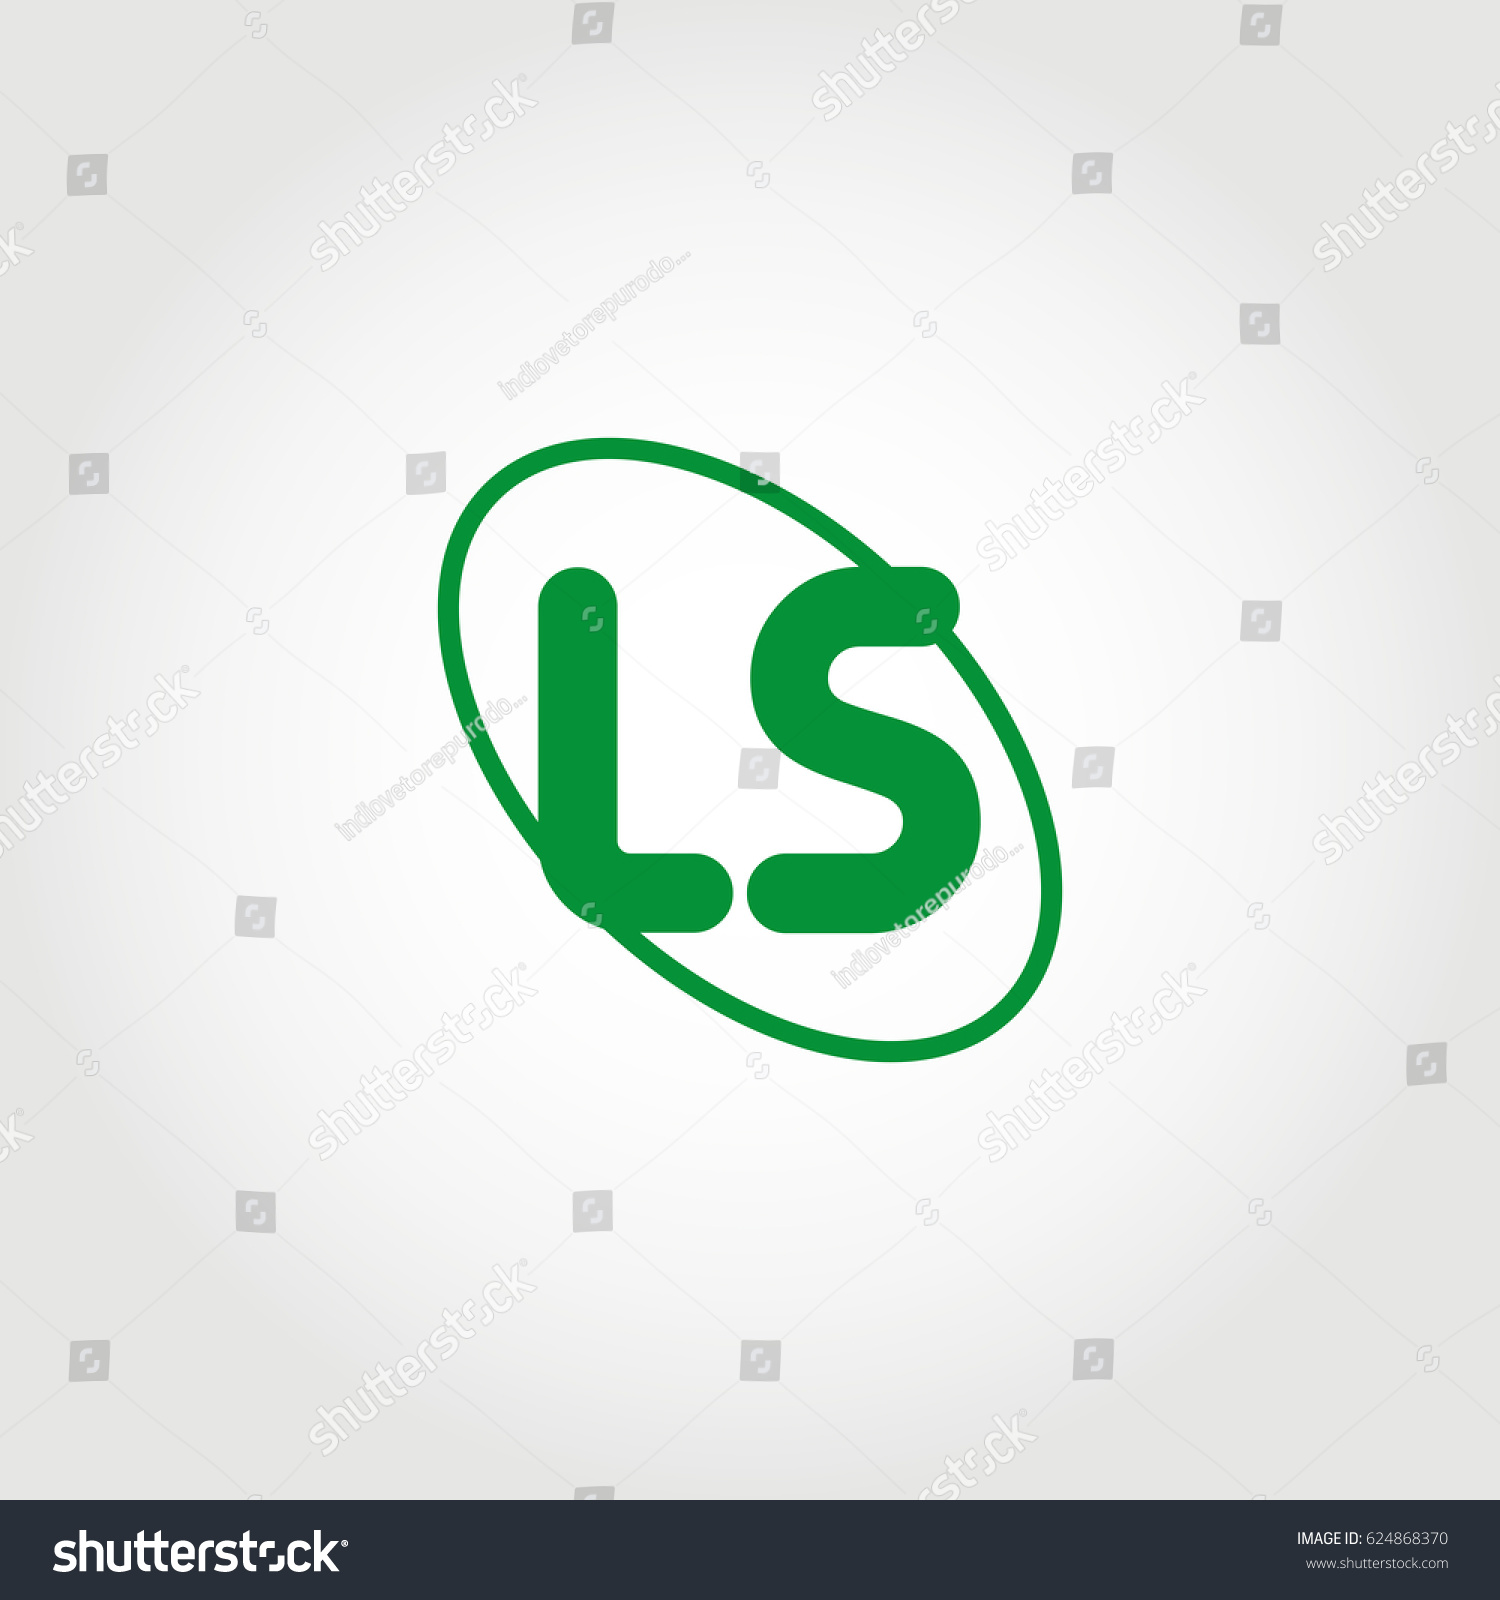 Initial Letter Ls Logo Green On Stock Vector Royalty